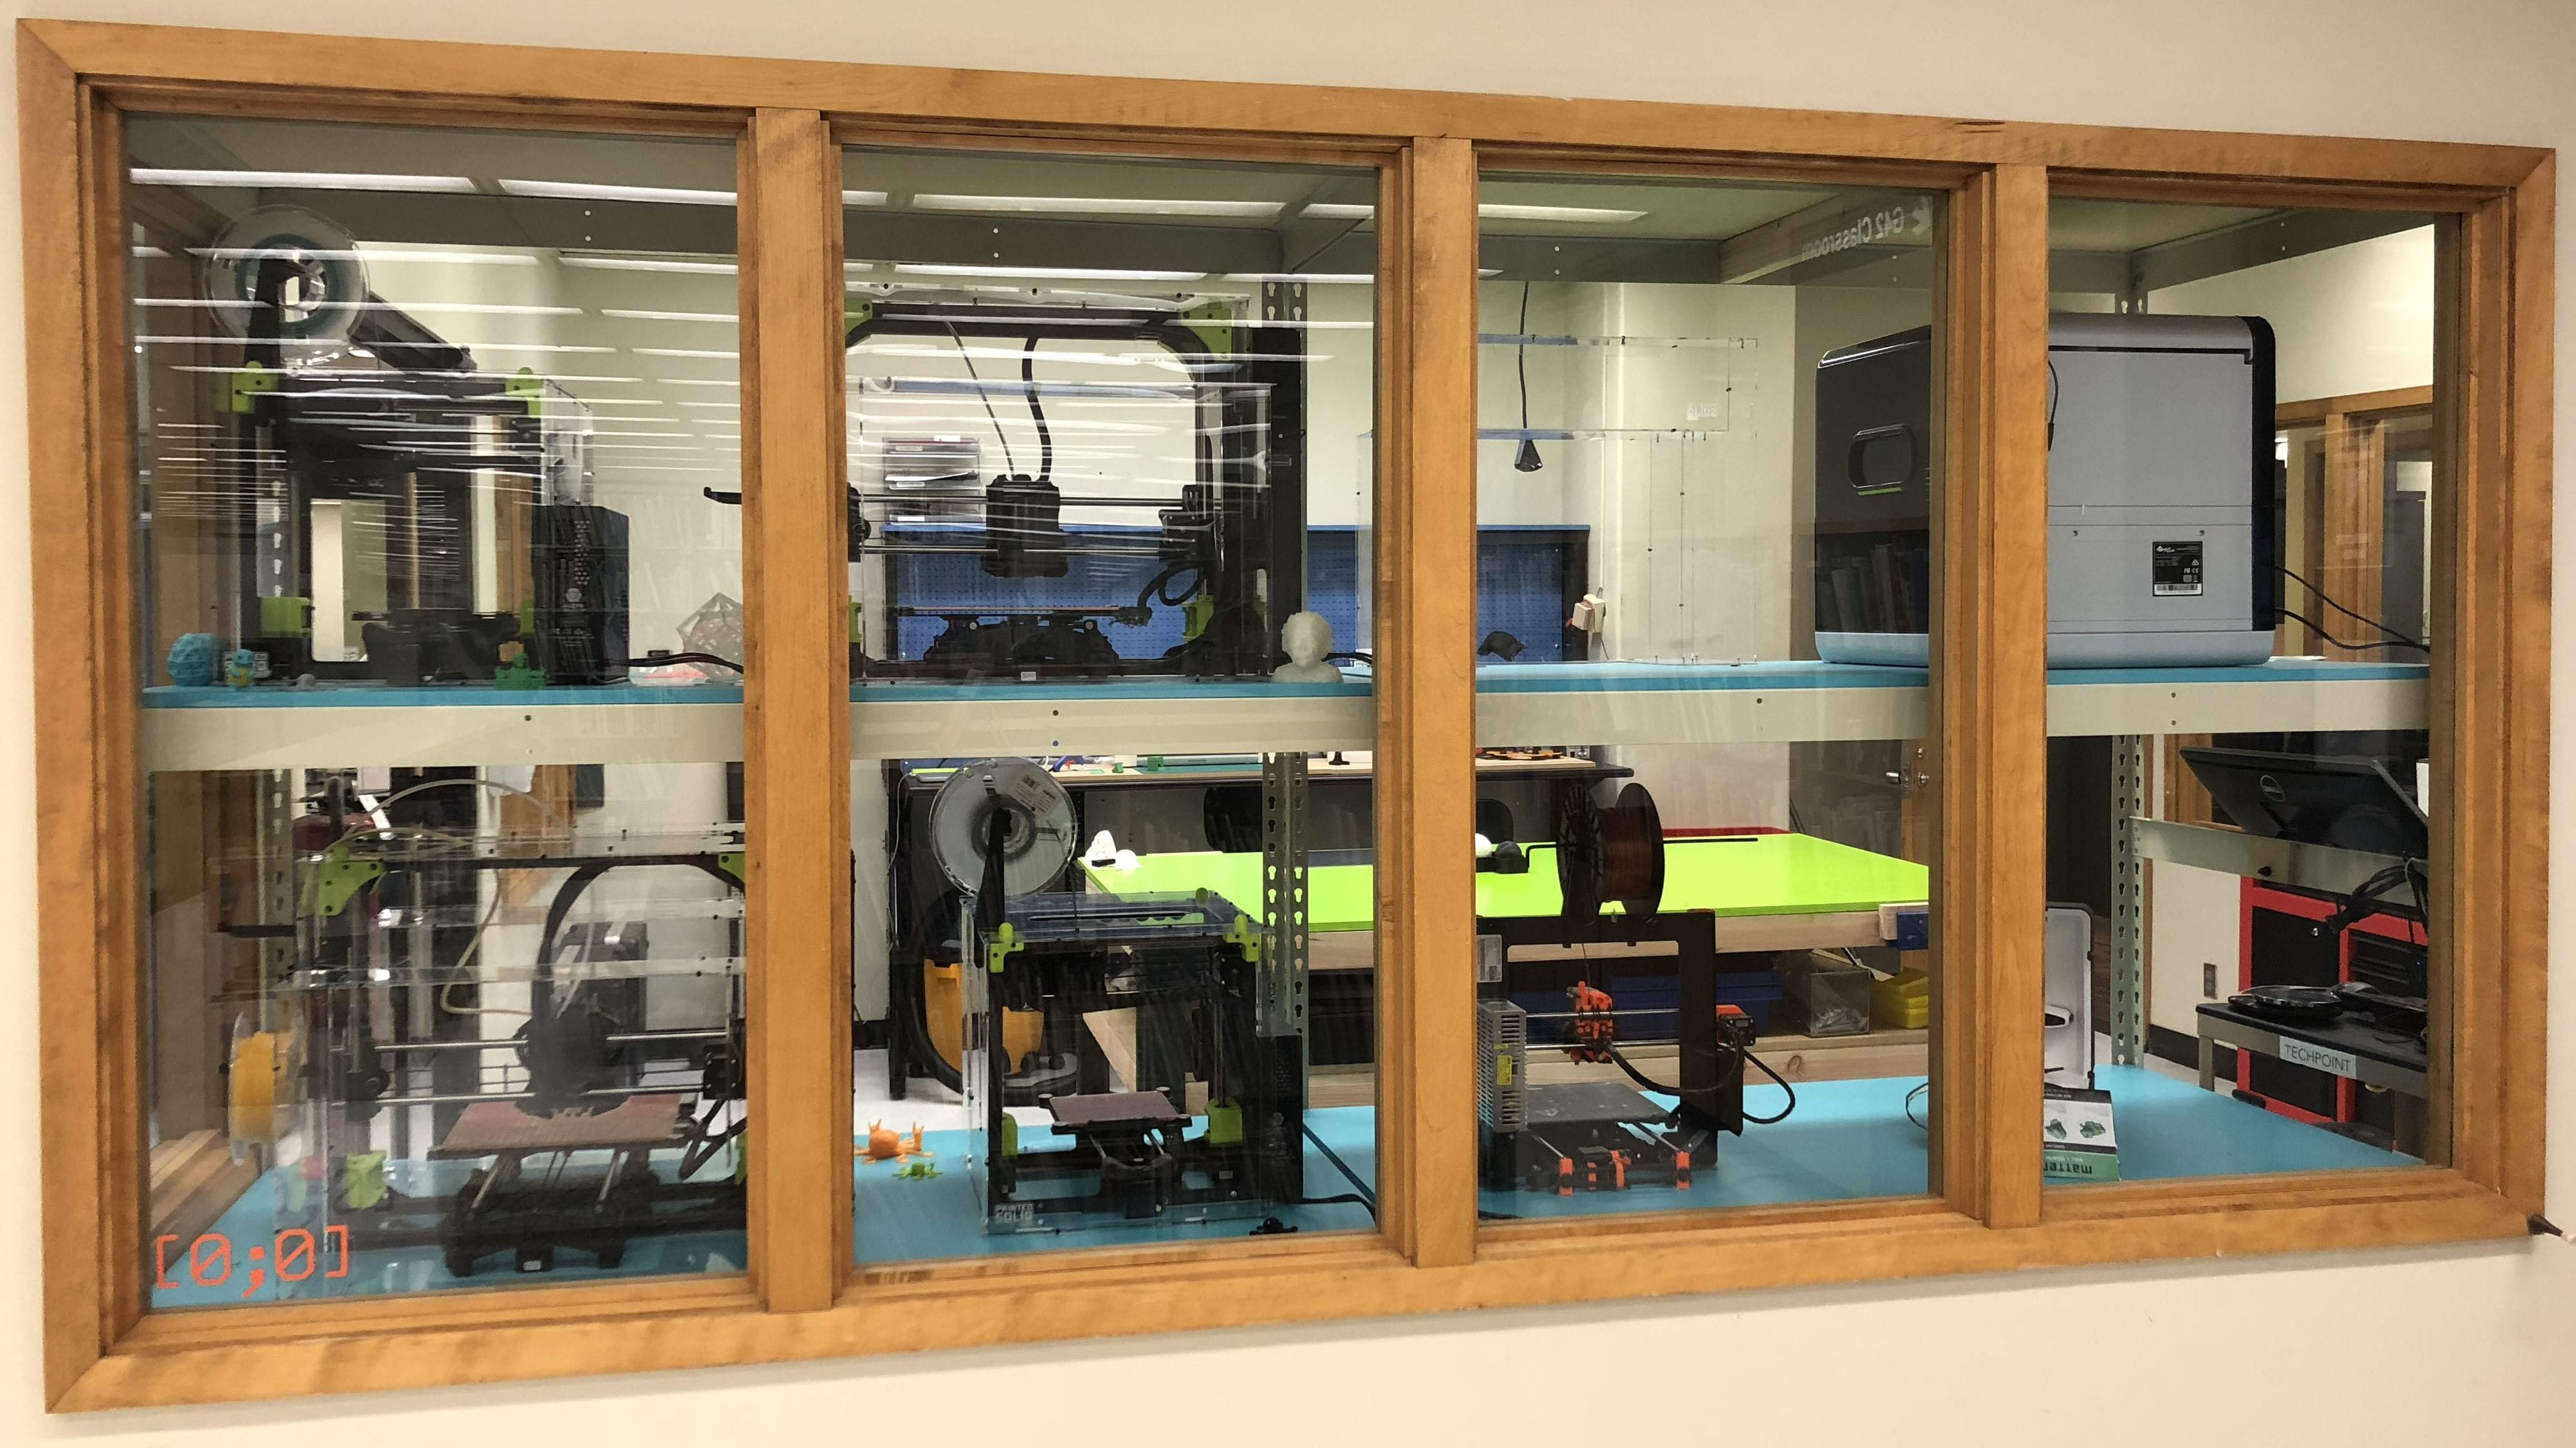 Photo of the Makerspace